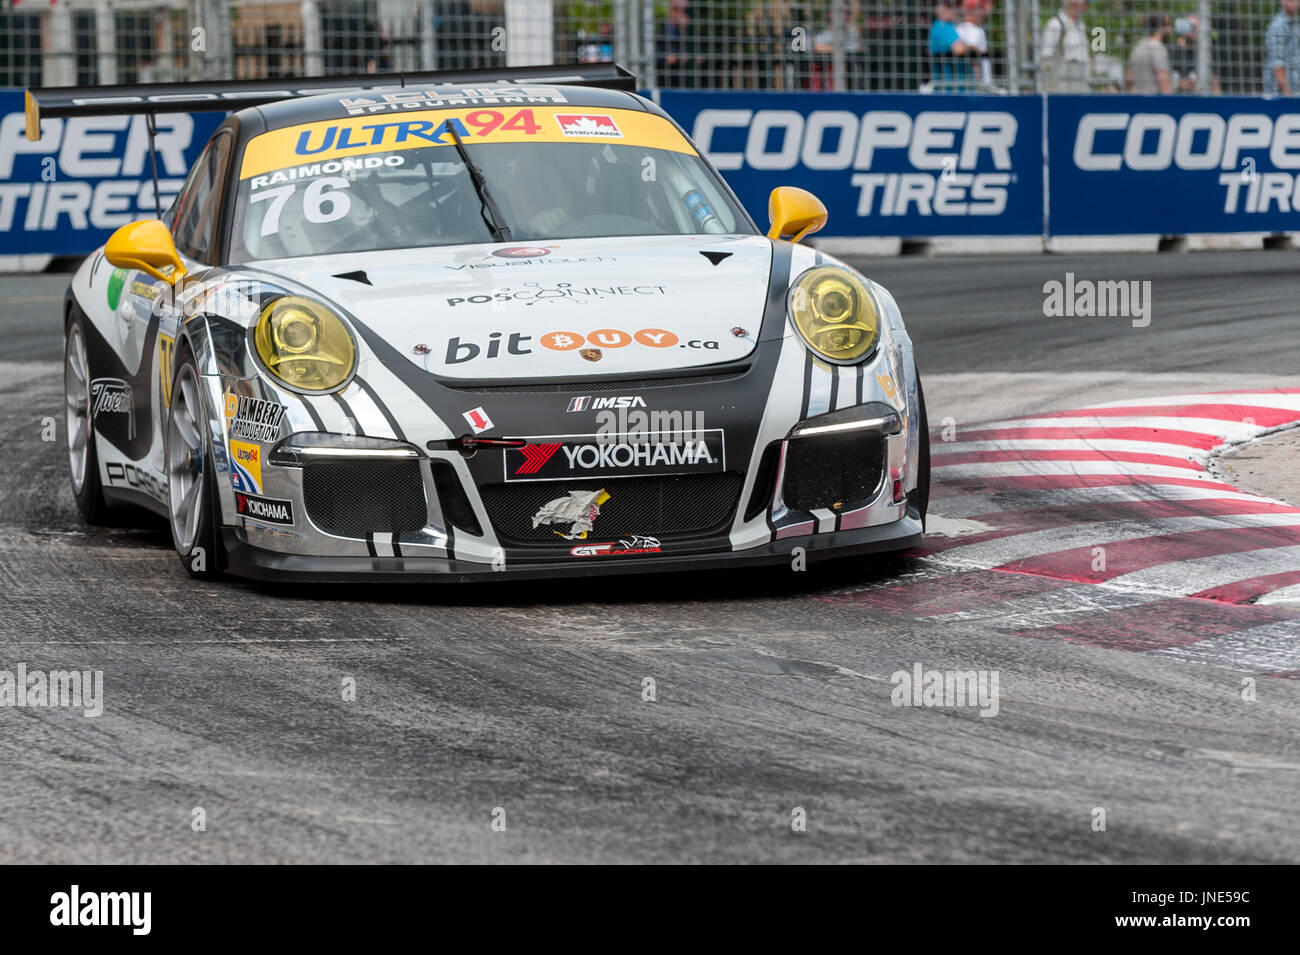 TORONTO, ON - JULY 16: Car during the Porsche Ultra 94 GT3 Cup Challenge Race at Exhibition Place in Toronto, ON, Canada on July 16 2017 Stock Photo